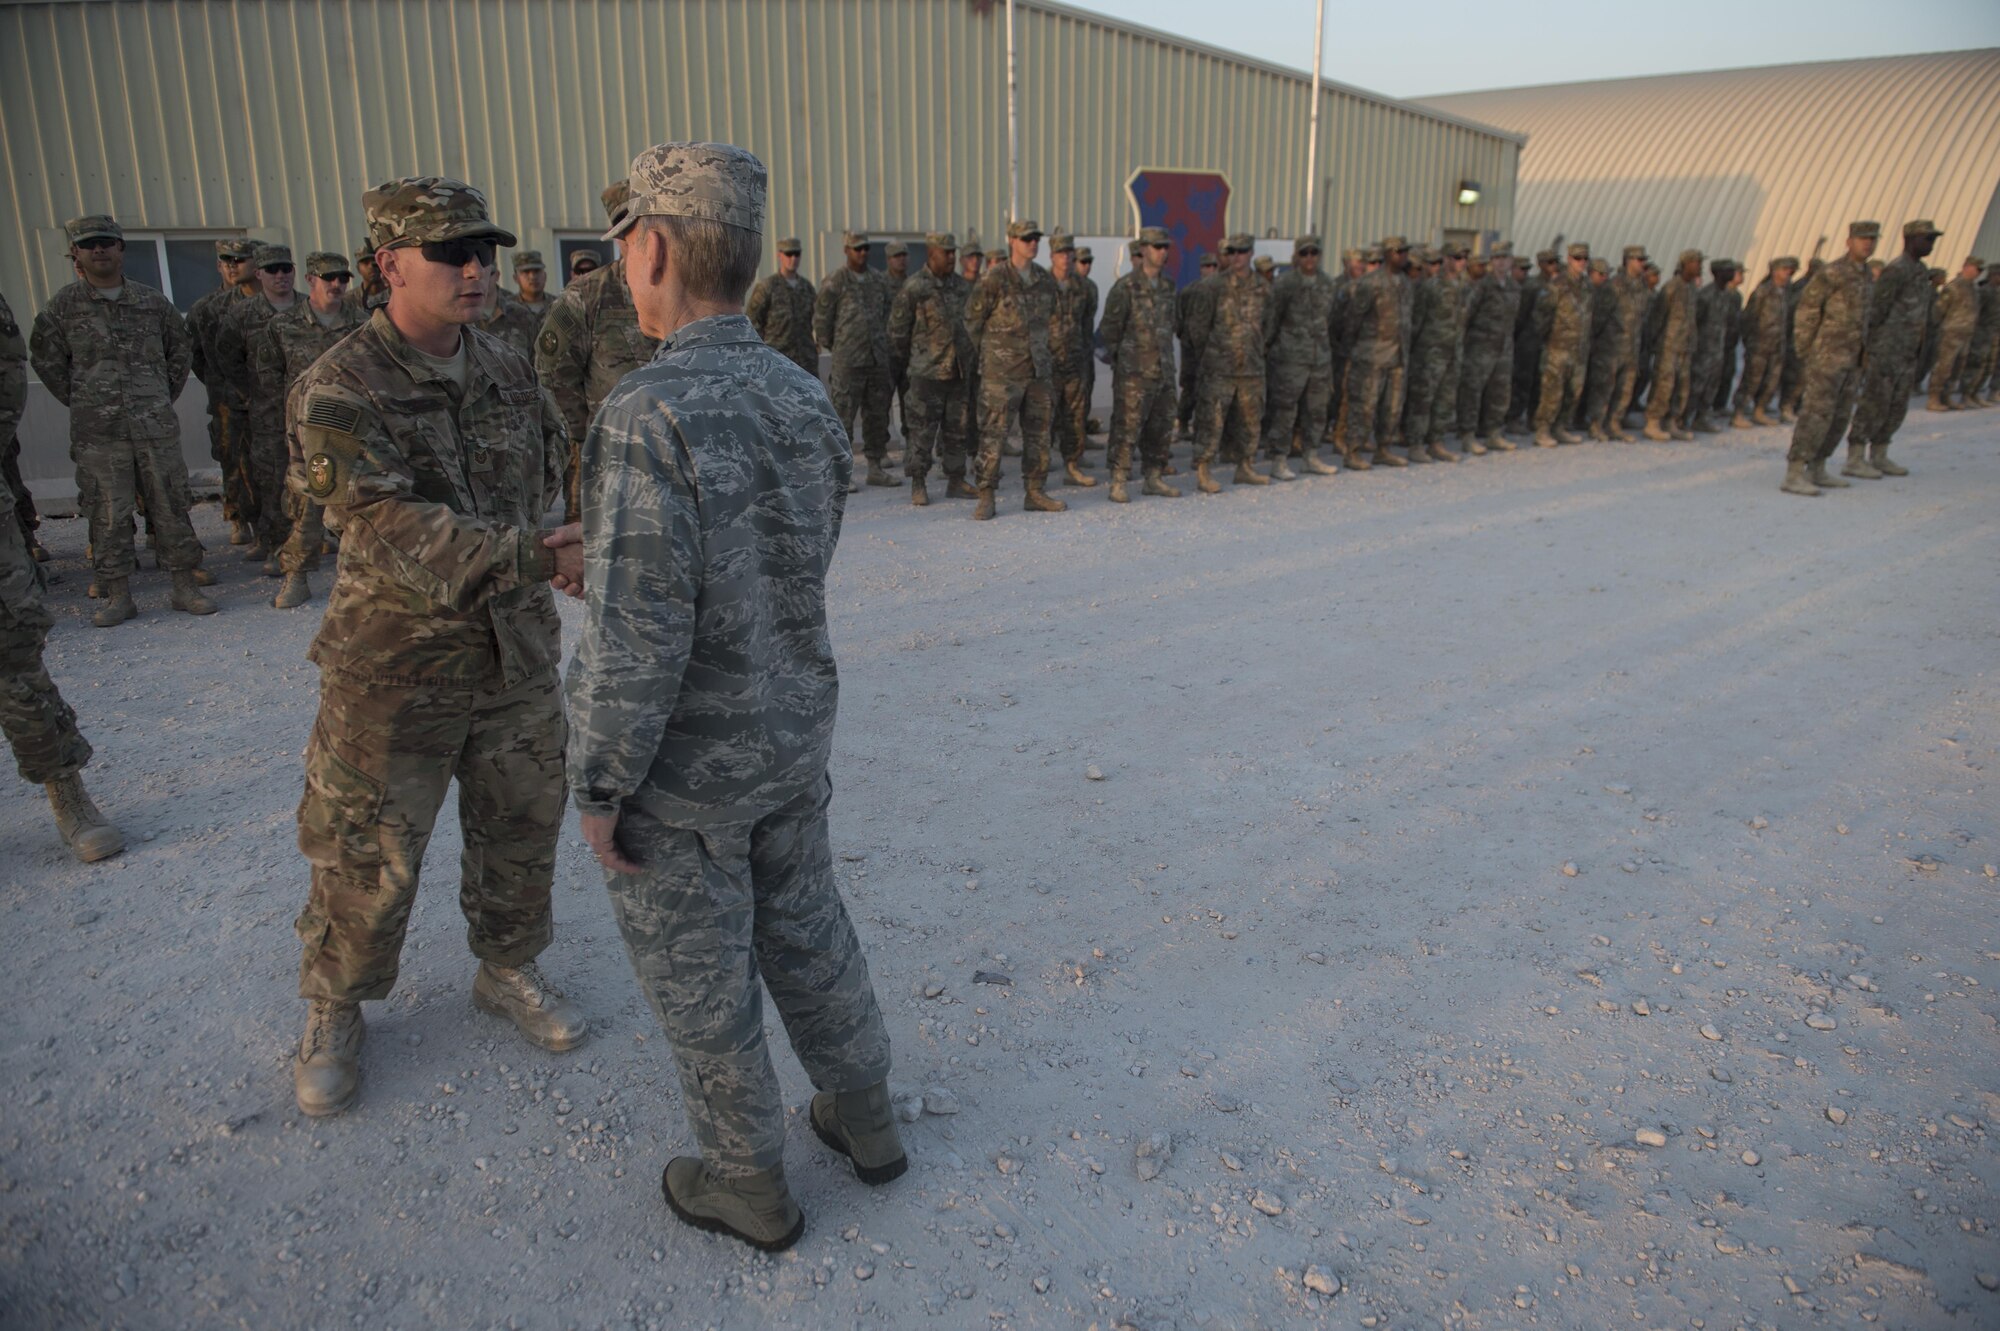 Gen. Hawk Carlisle, commander of Air Combat Command, talks with Tech. Sgt. James Frye, 577th Prime BEEF Squadron, about the capabilities of his squadron during a visit Nov. 21, 2016 at Al Udeid Air Base, Qatar. Carlisle is visiting bases in the U.S. Central Command area of responsibility to engage with Airmen and thank them for their service. (U.S. Air Force photo by Staff Sgt. Matthew B. Fredericks)